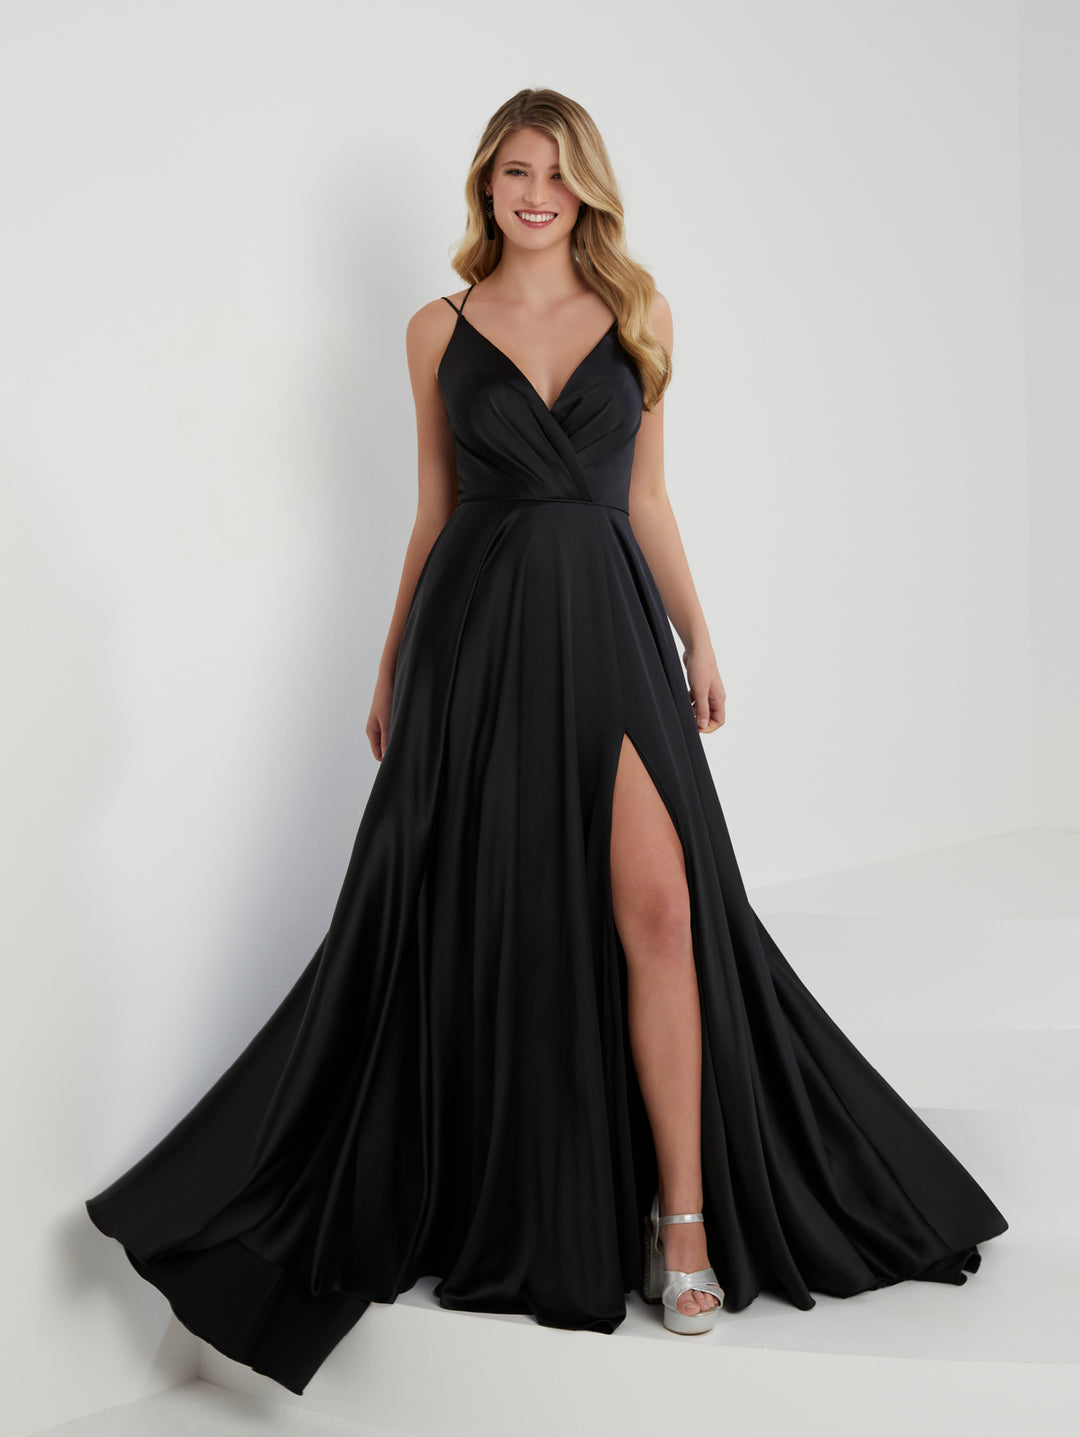 Crepe Satin Pocket Slit Gown by Tiffany Designs 16924